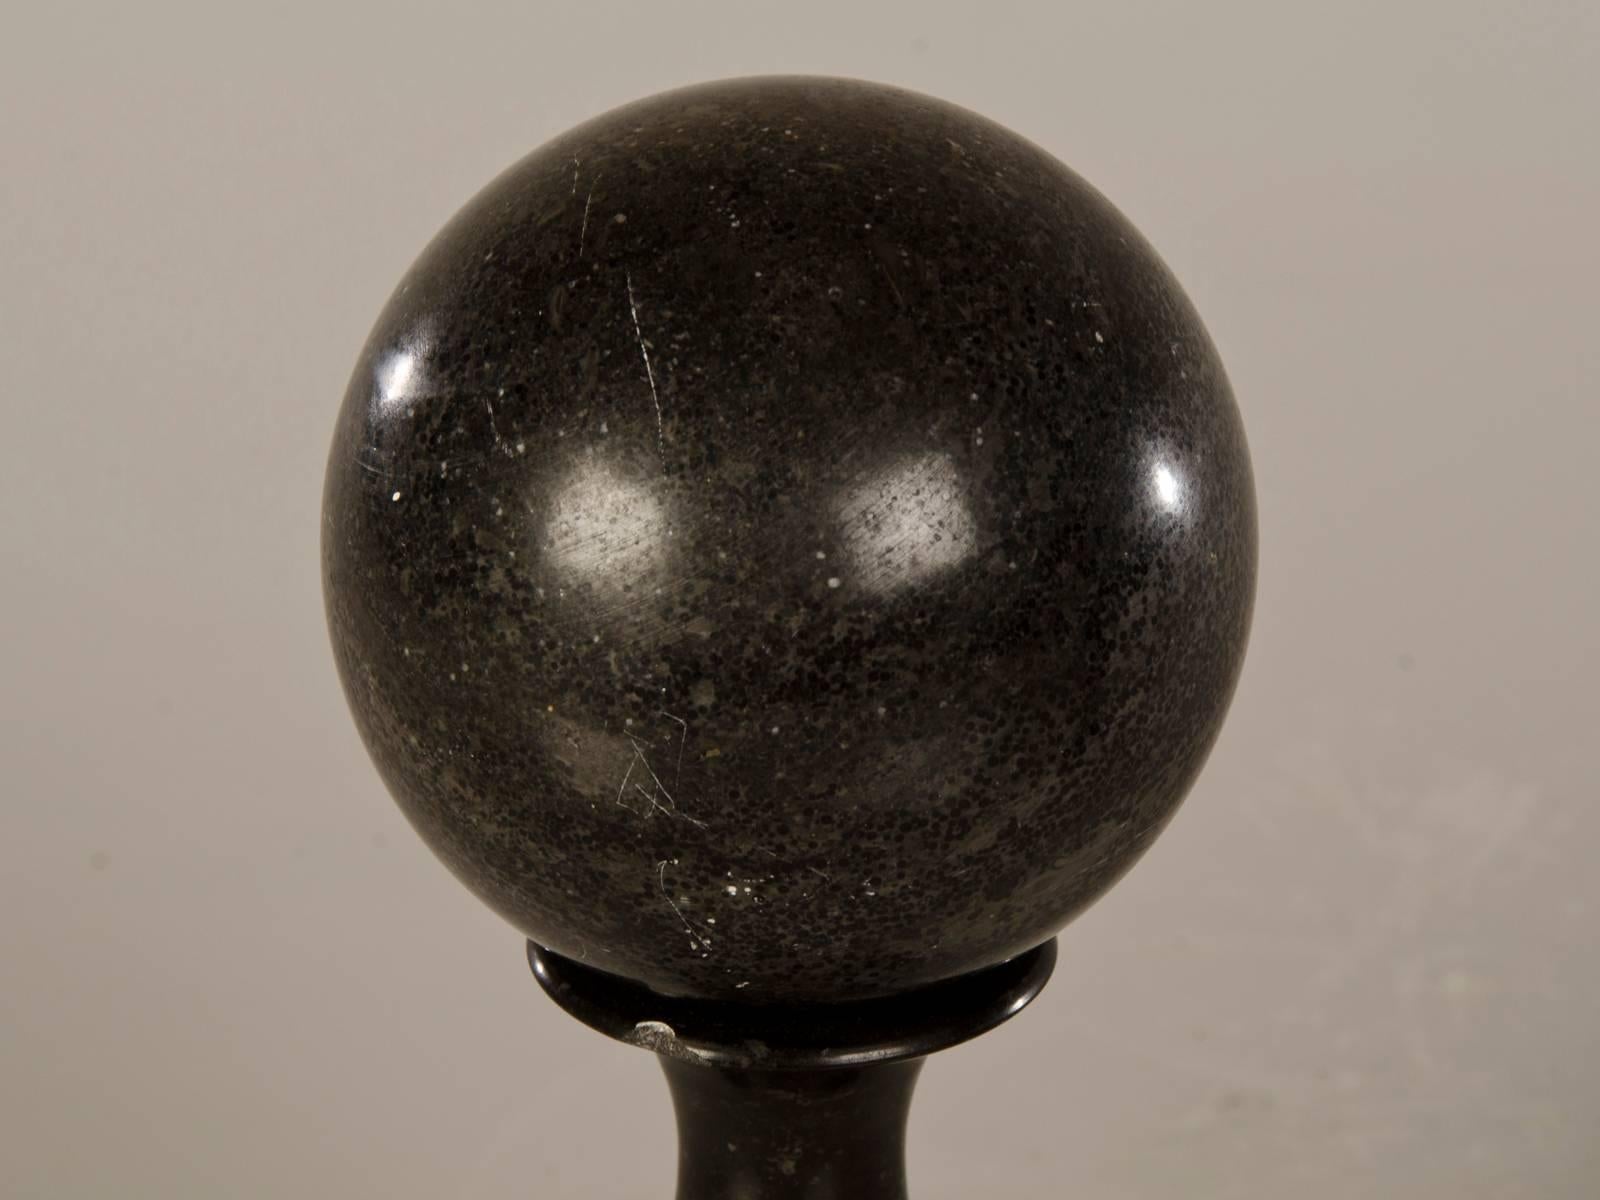 Carved Pair of Antique Italian Black Marble Spheres Atop Baluster Columns, circa 1890